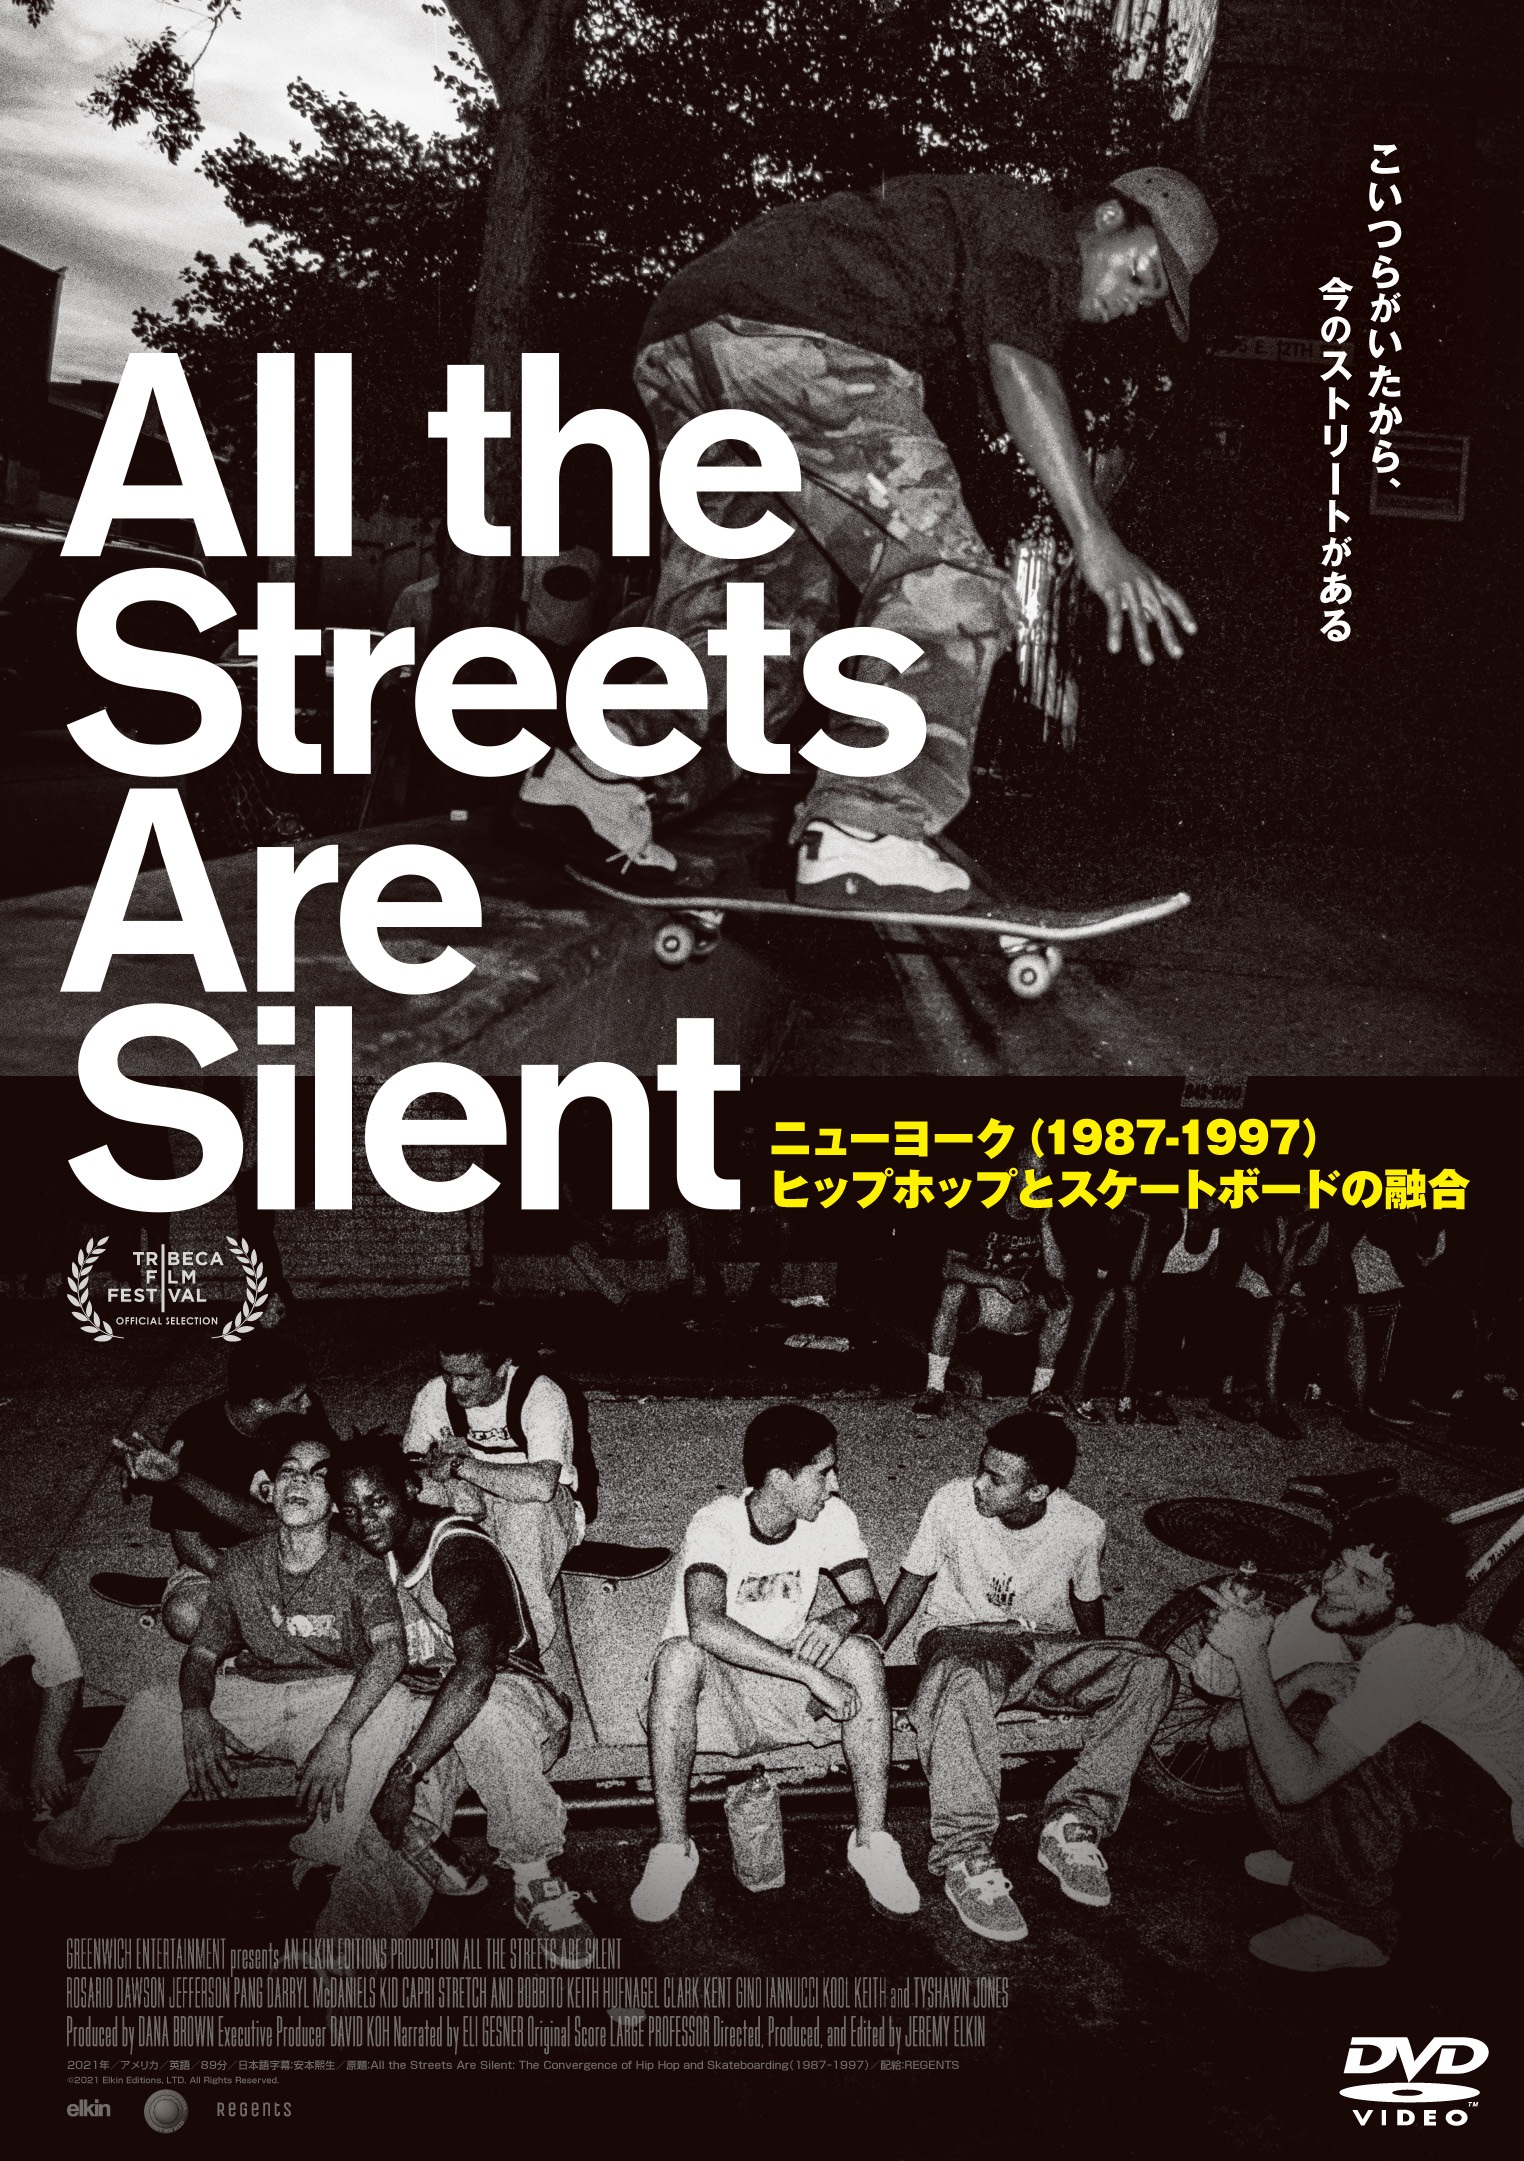 All the Streets Are Silent ニューヨーク（1987-1997）ヒップホップと